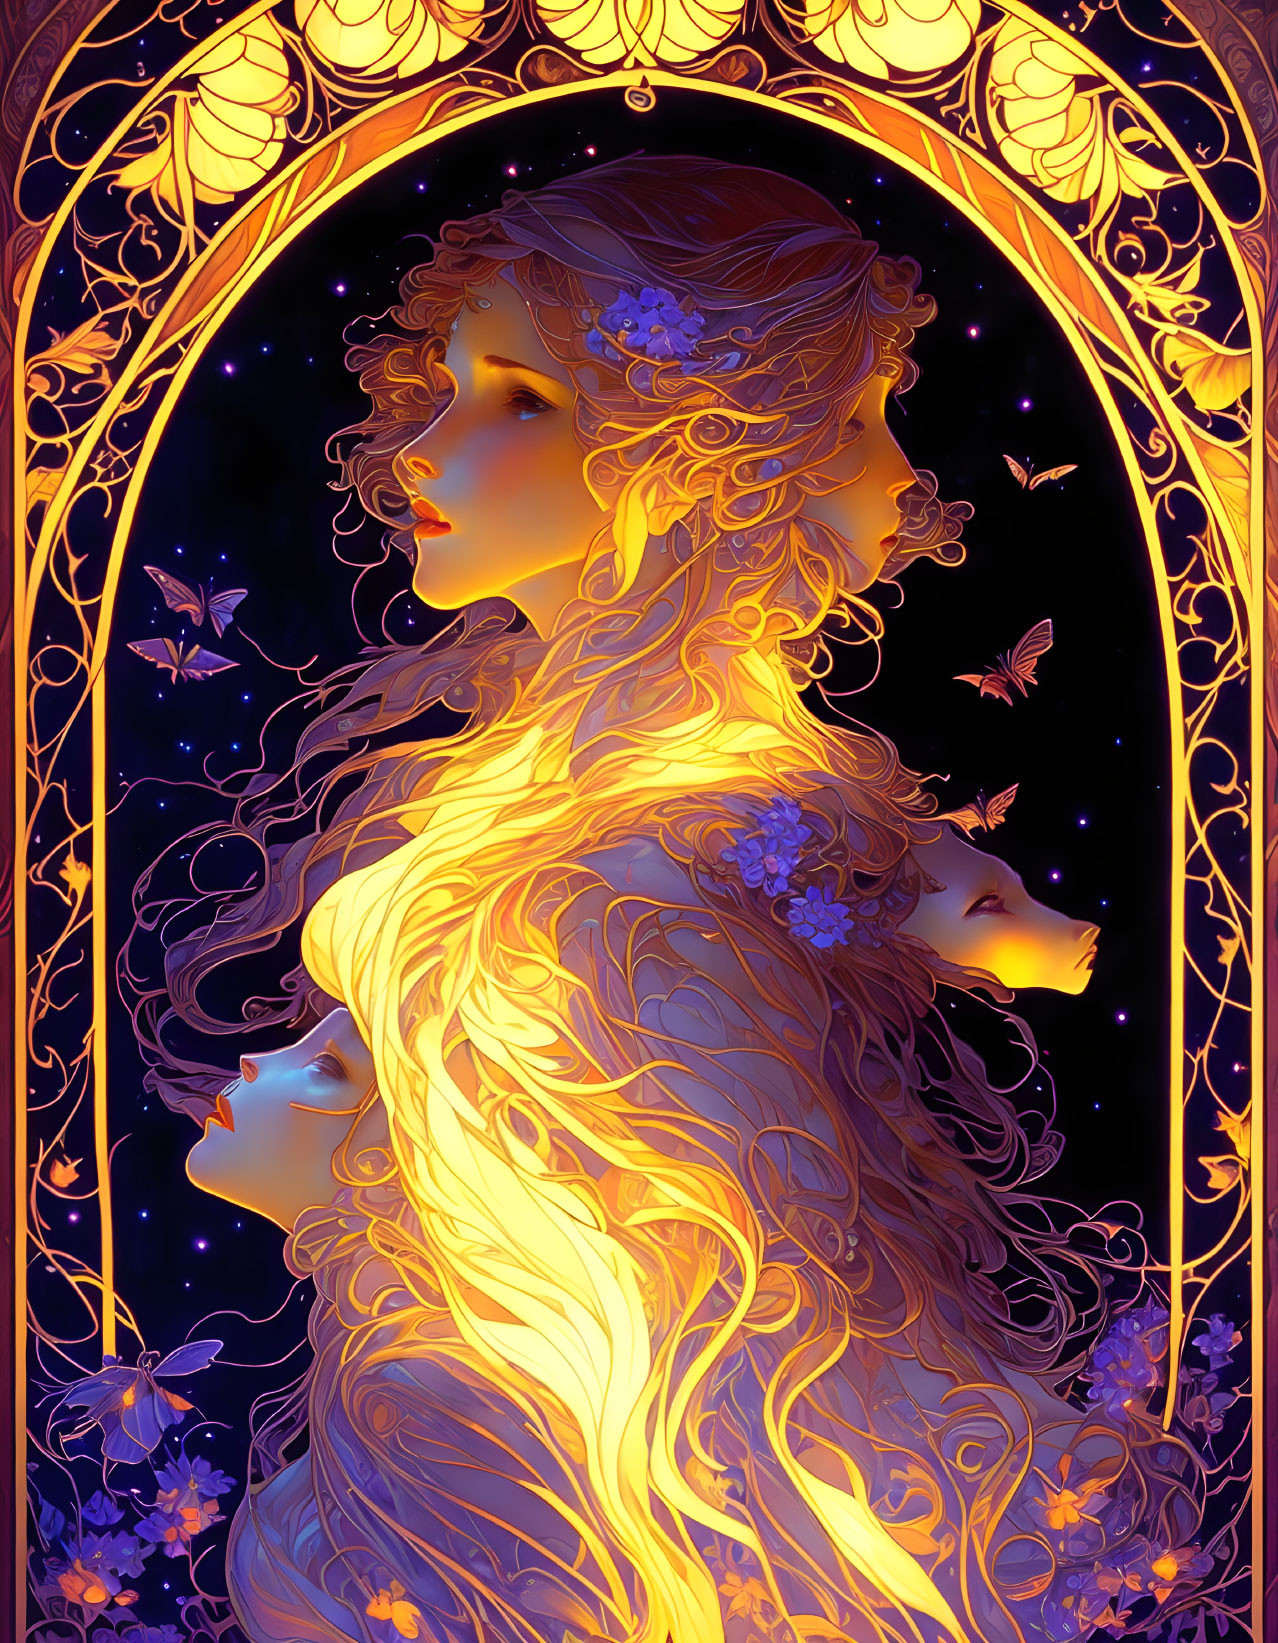 Art Nouveau Woman with Golden Hair and Celestial Motifs in Vibrant Colors